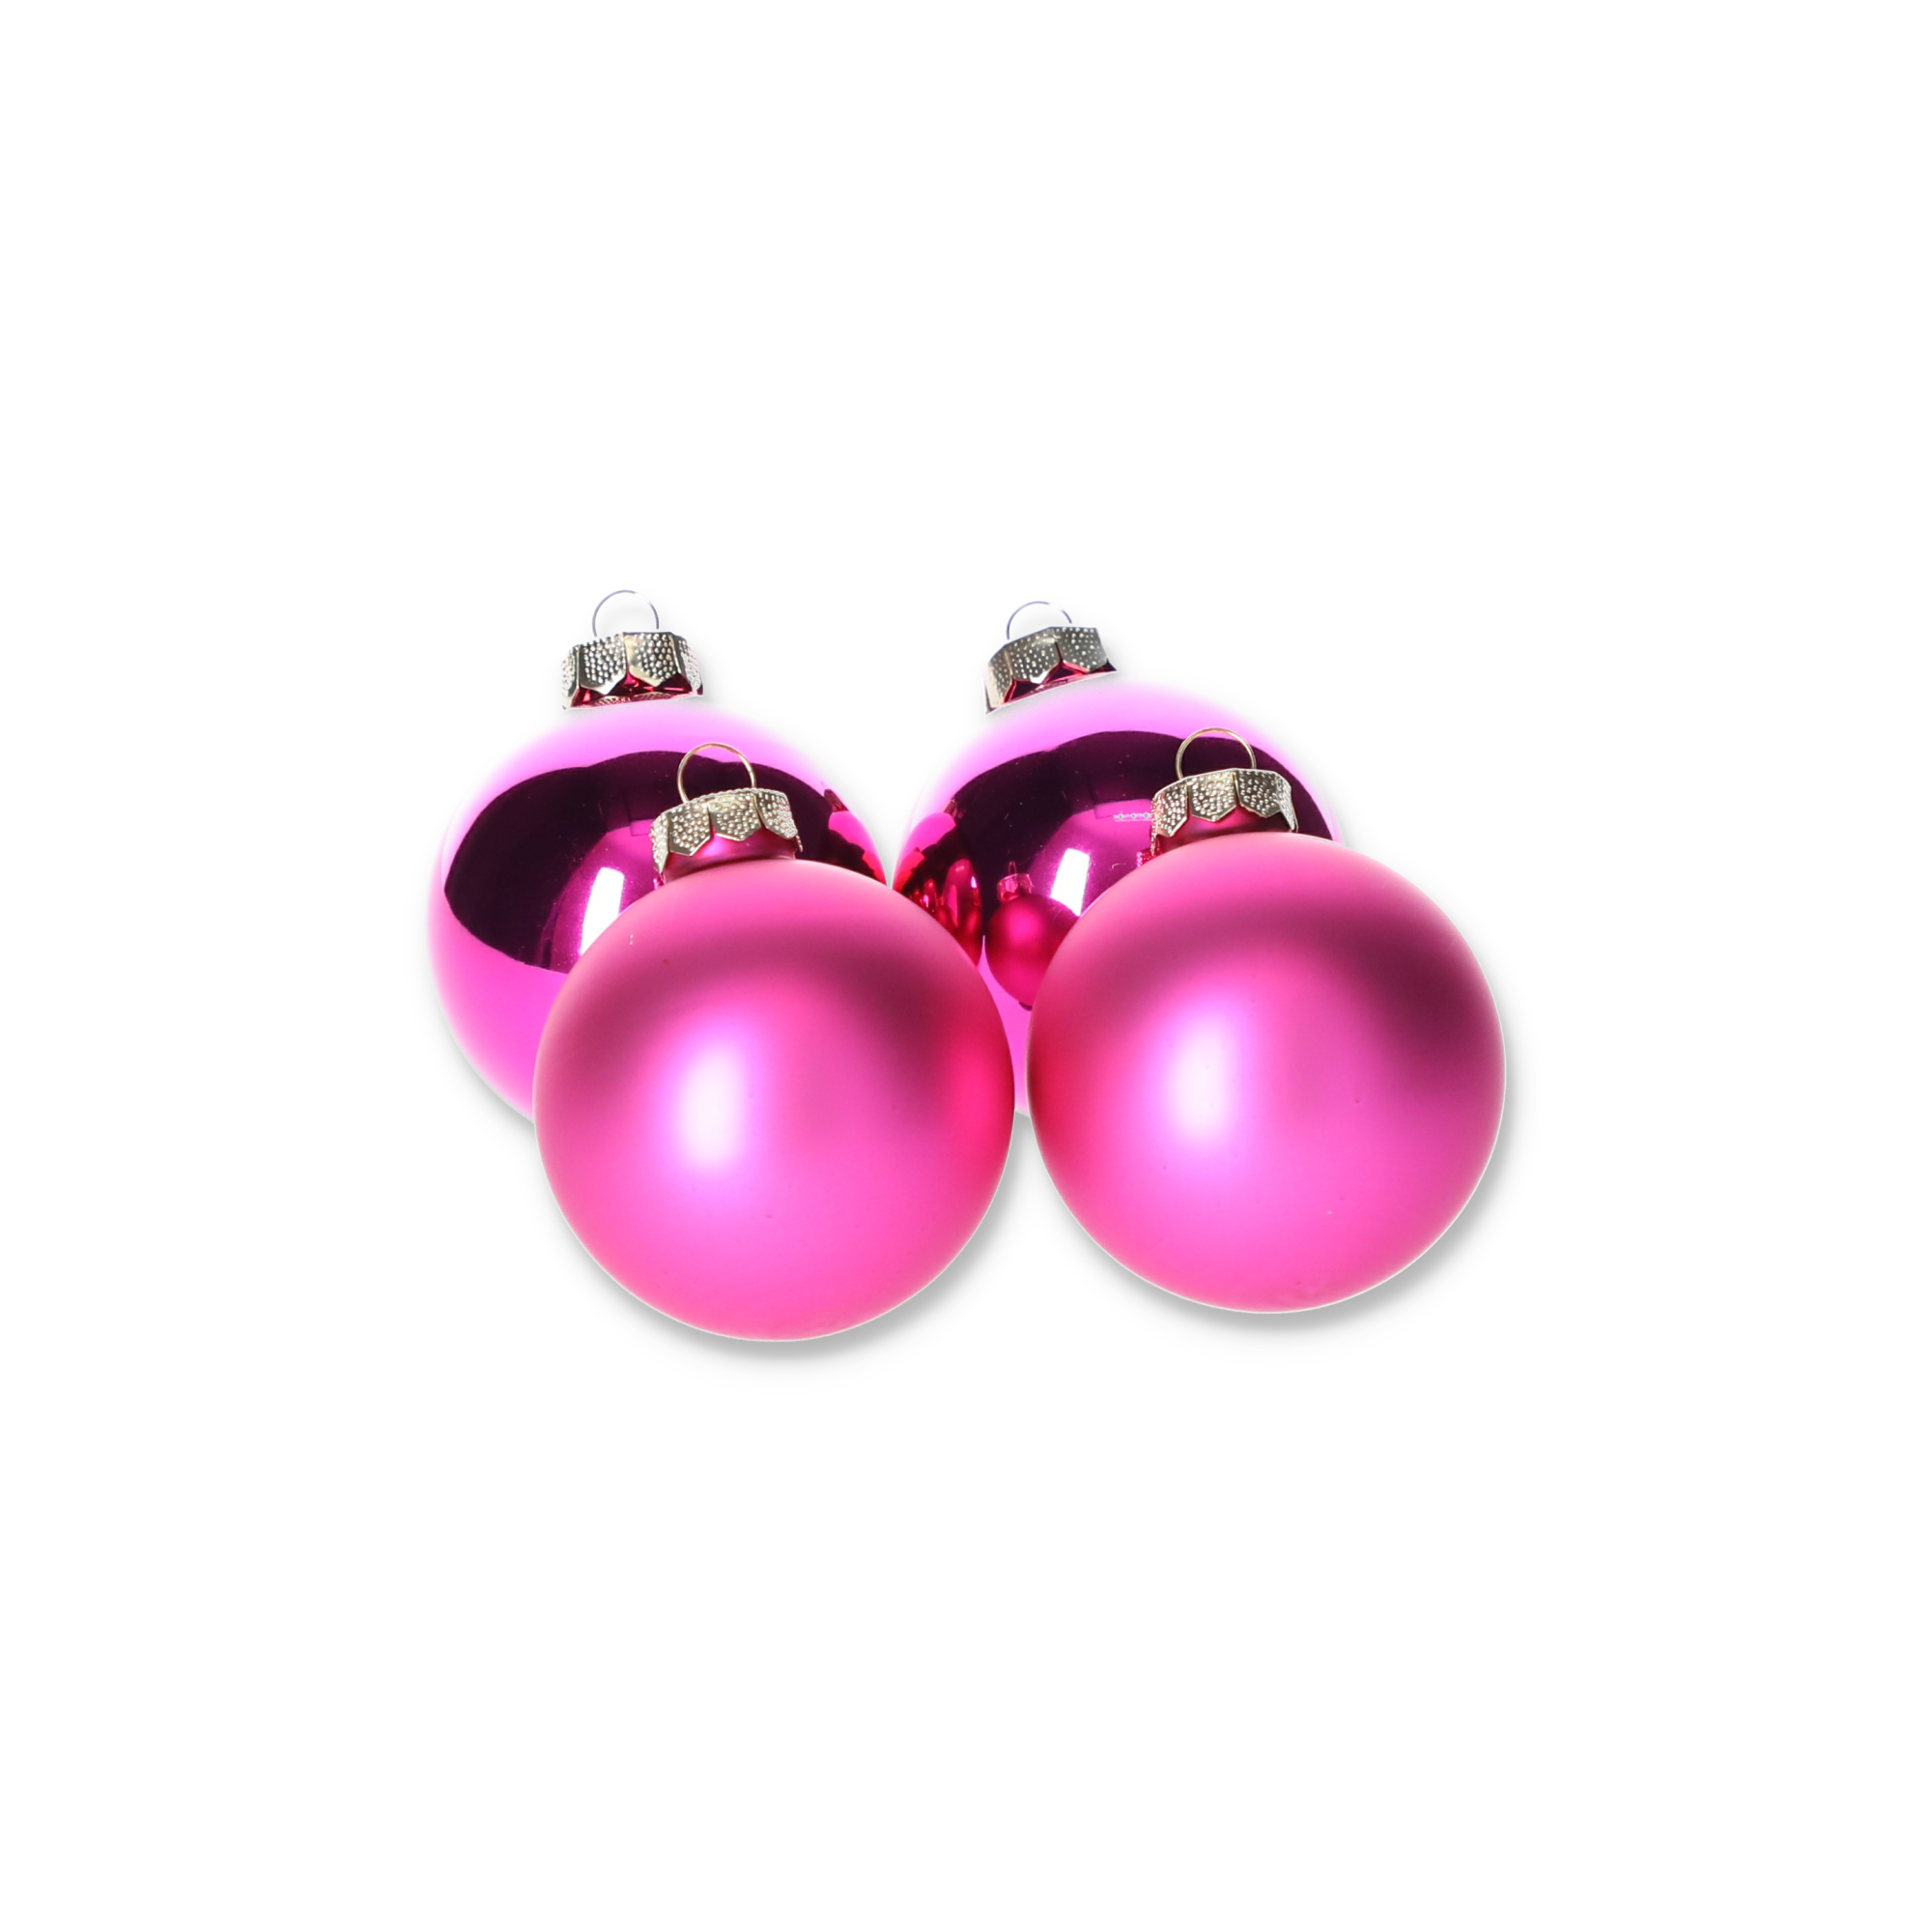 Christbaumkugeln pink Ø 3 cm, 28-teilig + product picture